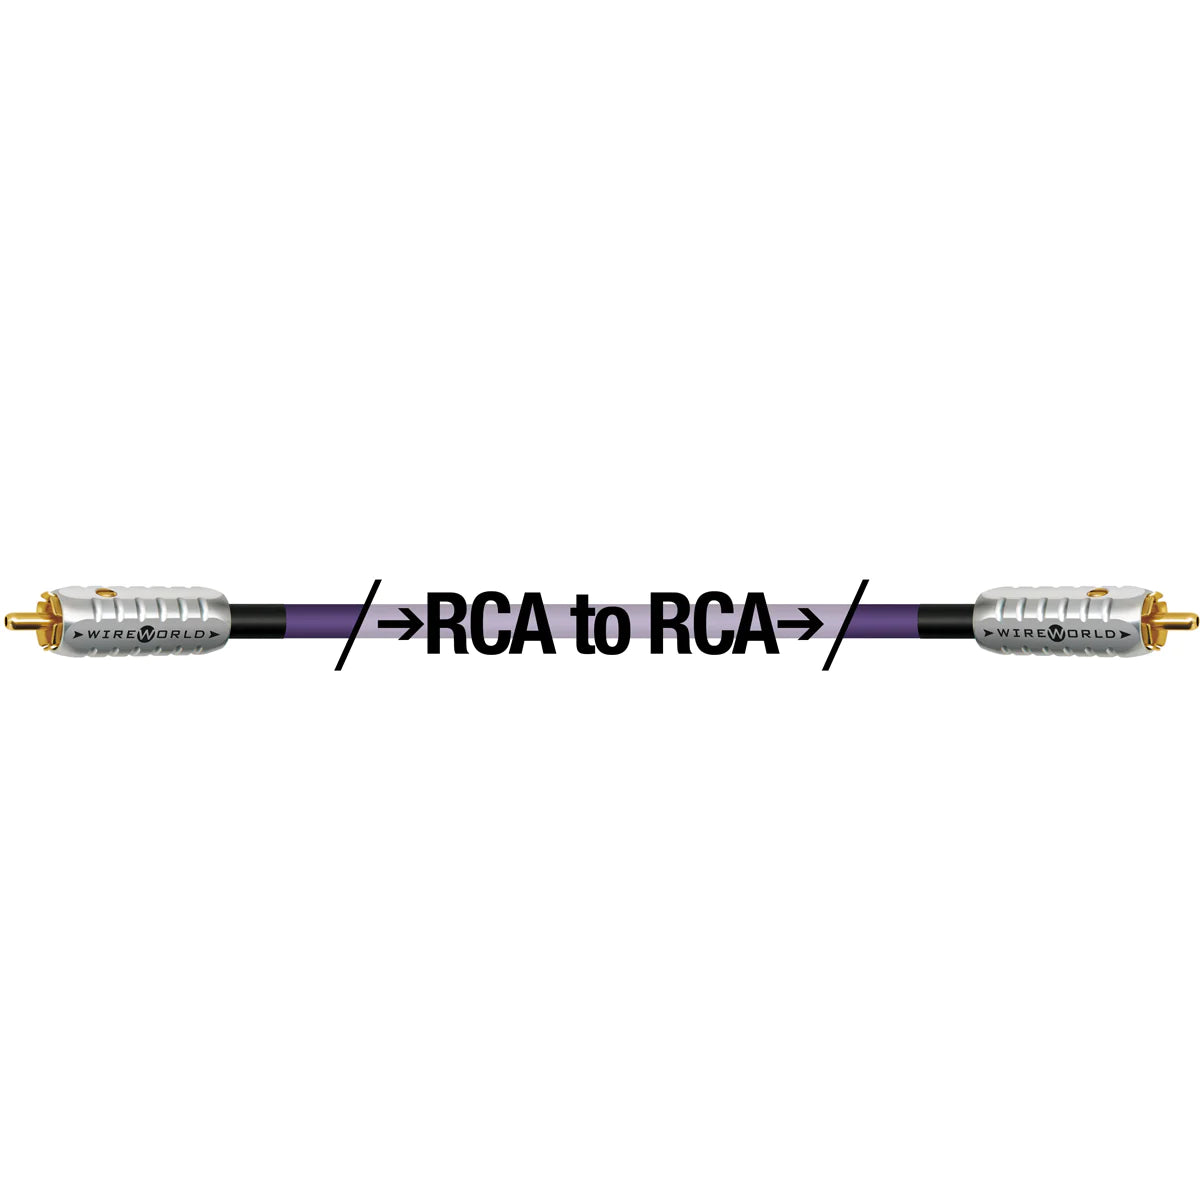 Wireworld Ultraviolet 8 Coaxial Digital Audio Cable